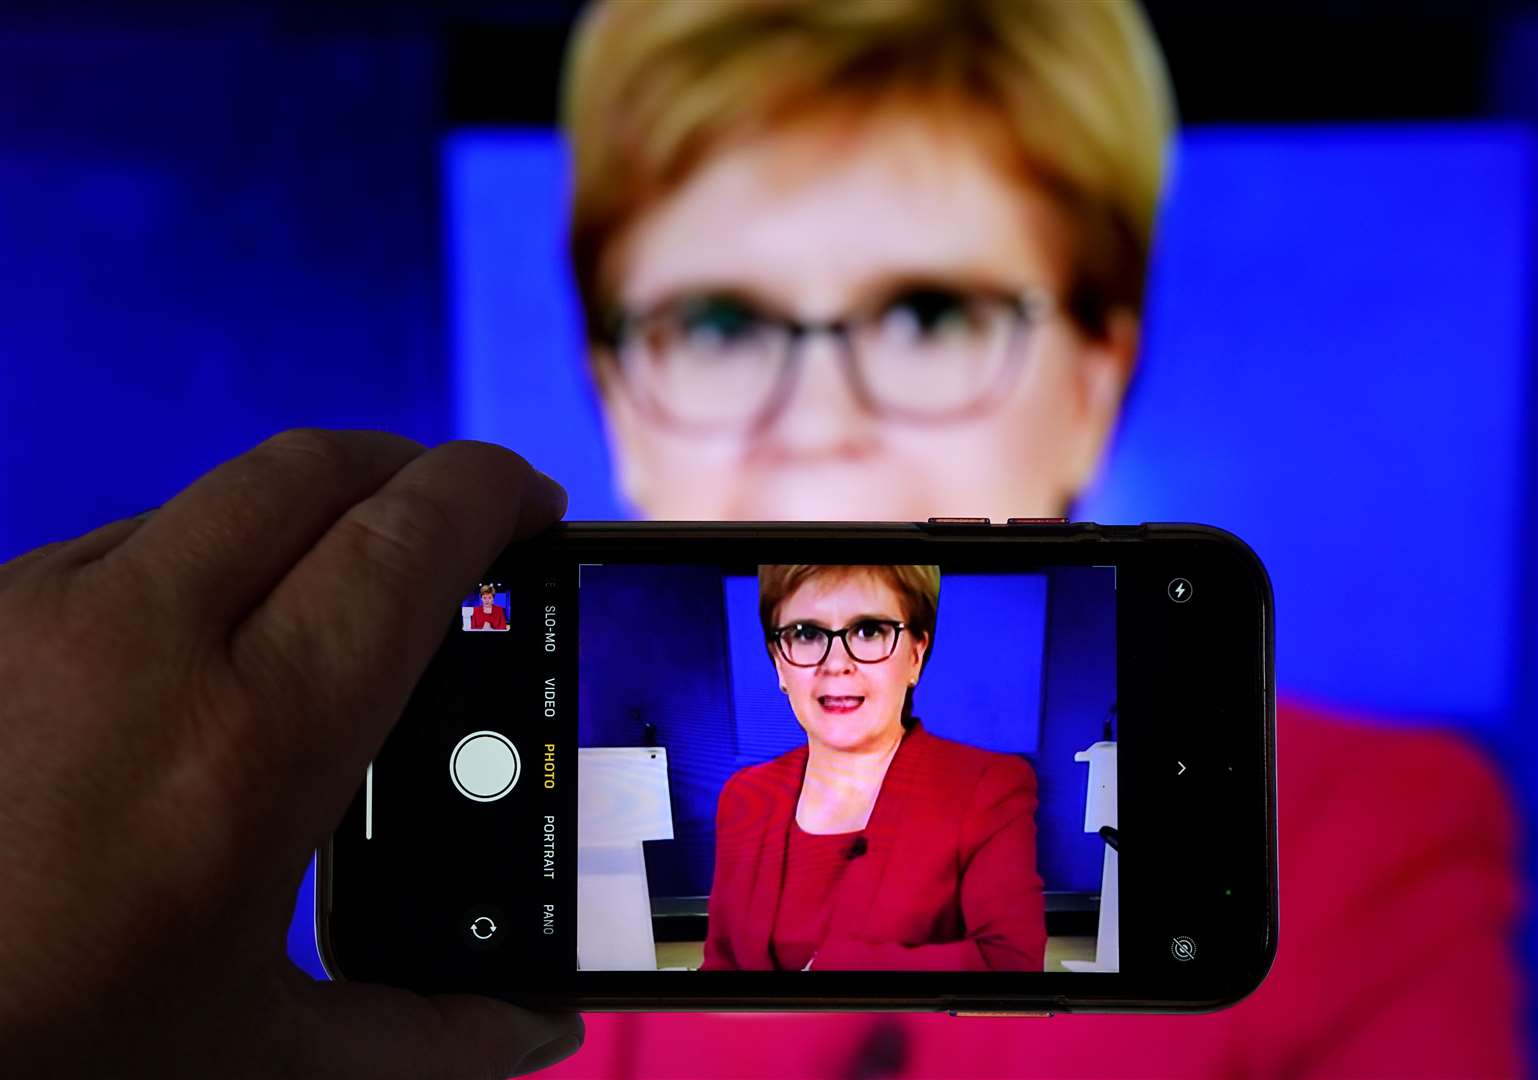 A person uses their phone to film a televised broadcast of First Minister Nicola Sturgeon speaking to MSPs during a virtual sitting of the Scottish Parliament (Andrew Milligan/PA)